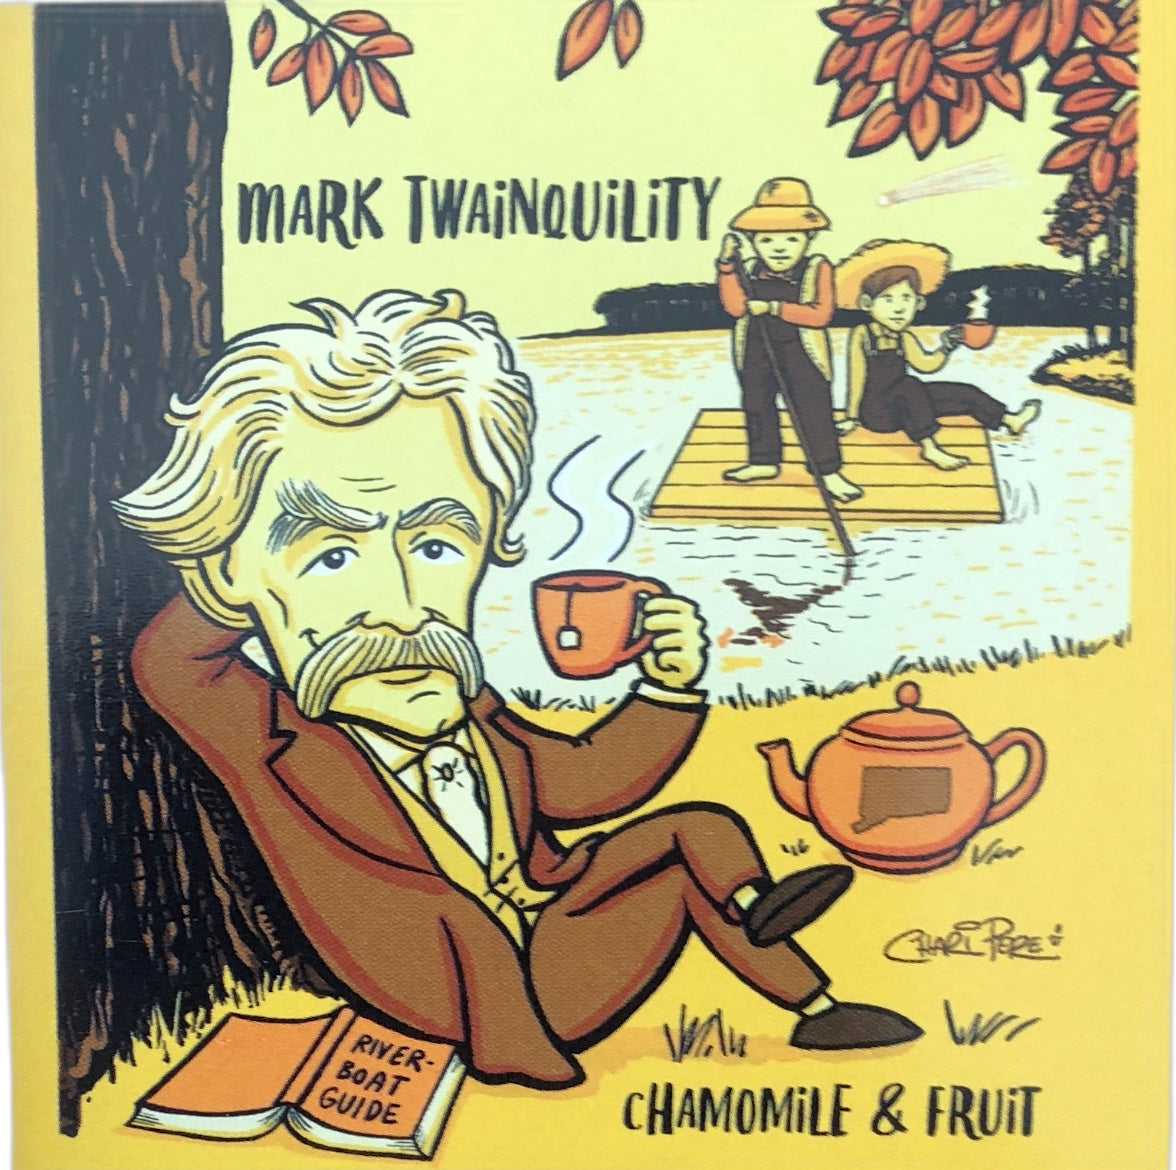 Mark TwainQuility (Magnet)